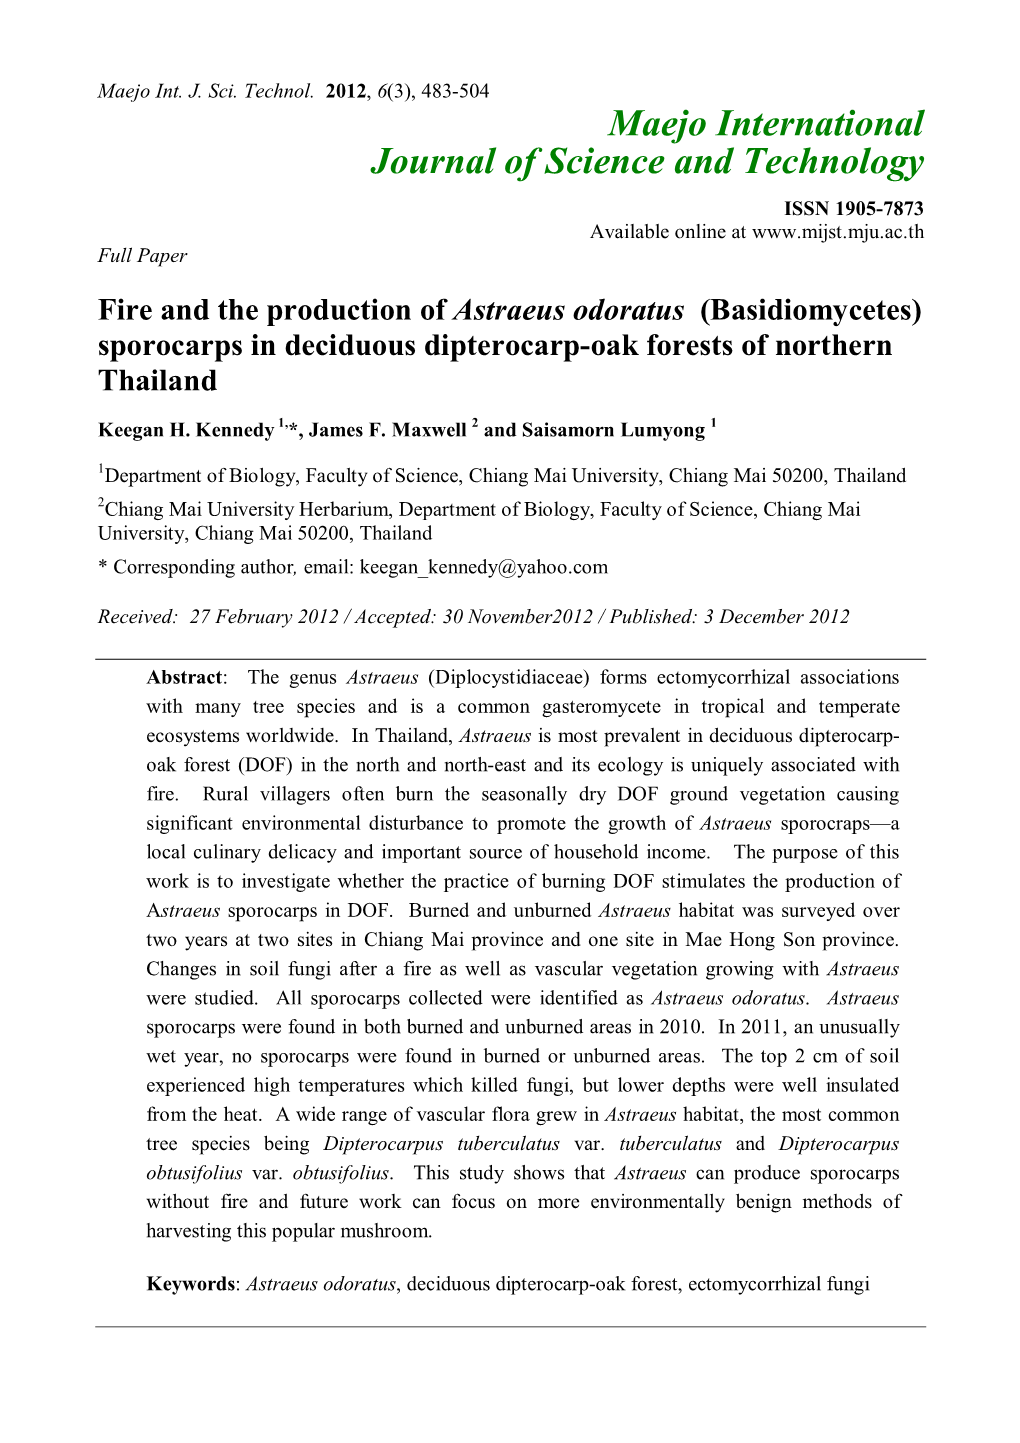 Fire and the Production of Astraeus Odoratus (Basidiomycetes) Sporocarps in Deciduous Dipterocarp-Oak Forests of Northern Thailand